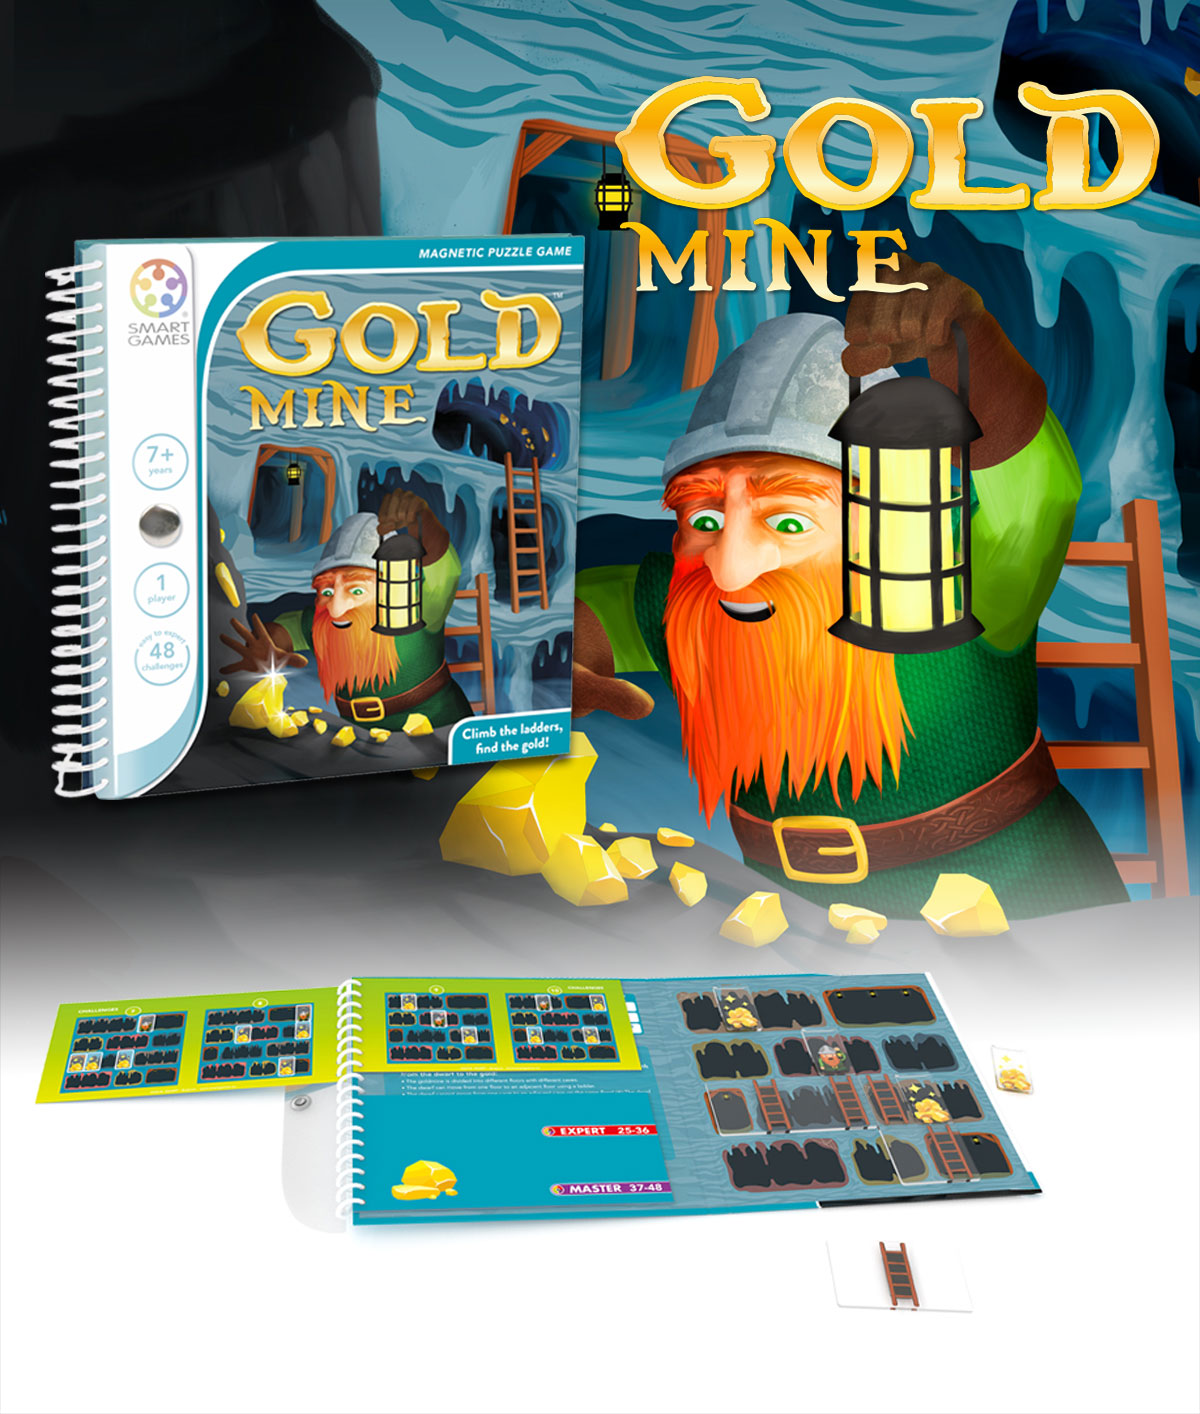 games on gold